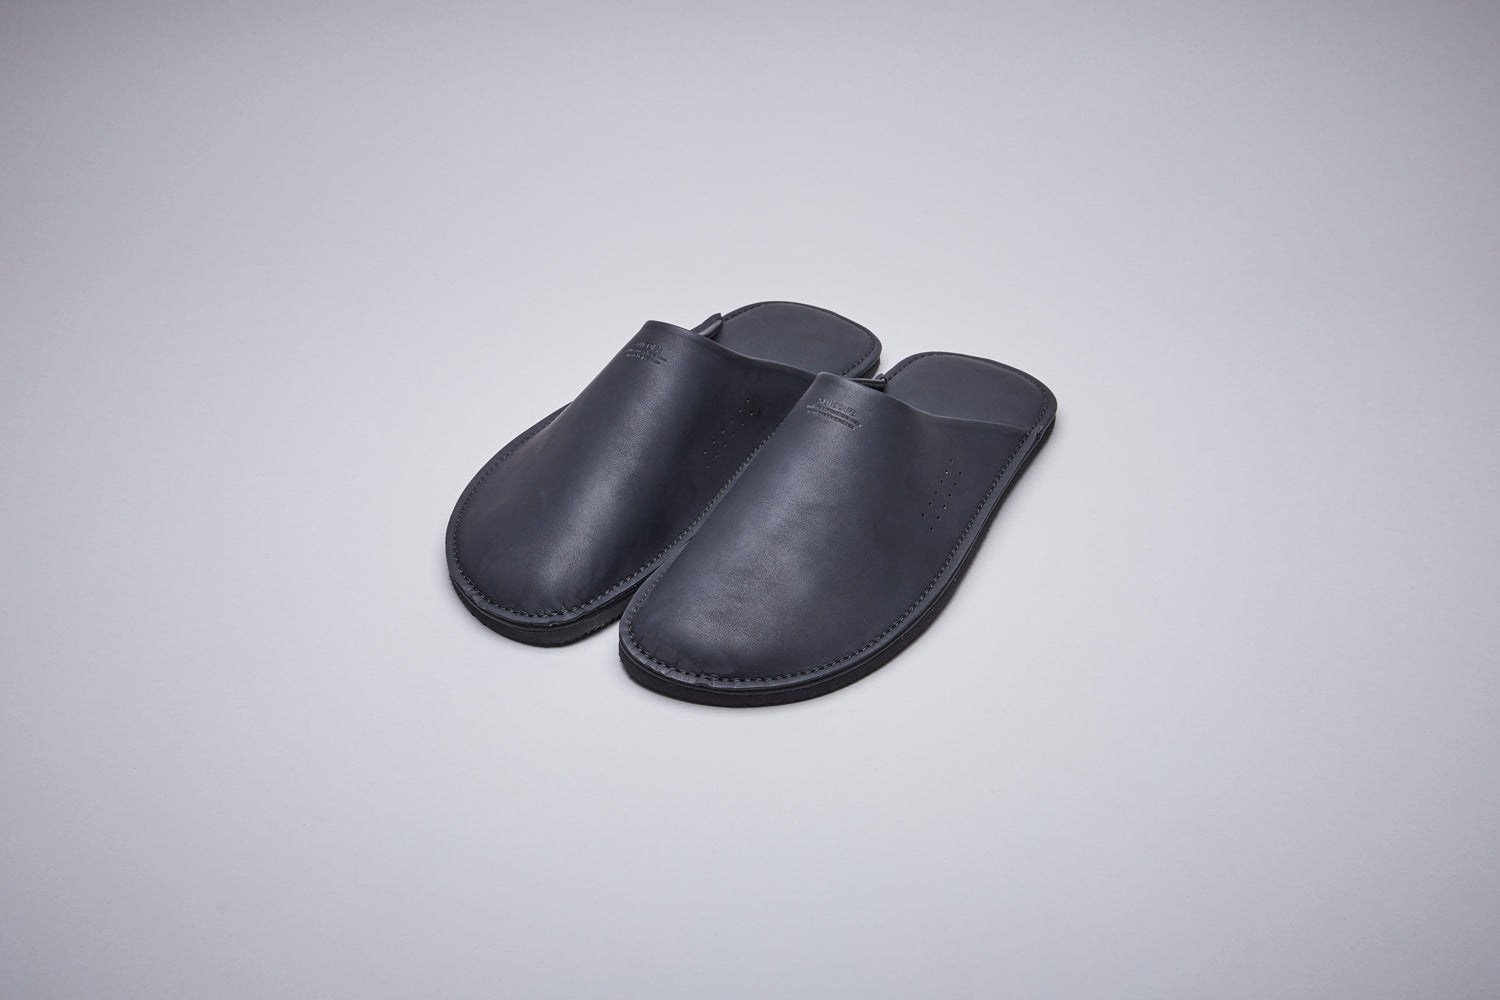 SUICOKE LIPPER slides with PU Leather upper, beige flat-type original sole. From Fall/Winter 2021 collection on SUICOKE Official US & Canada Webstore.